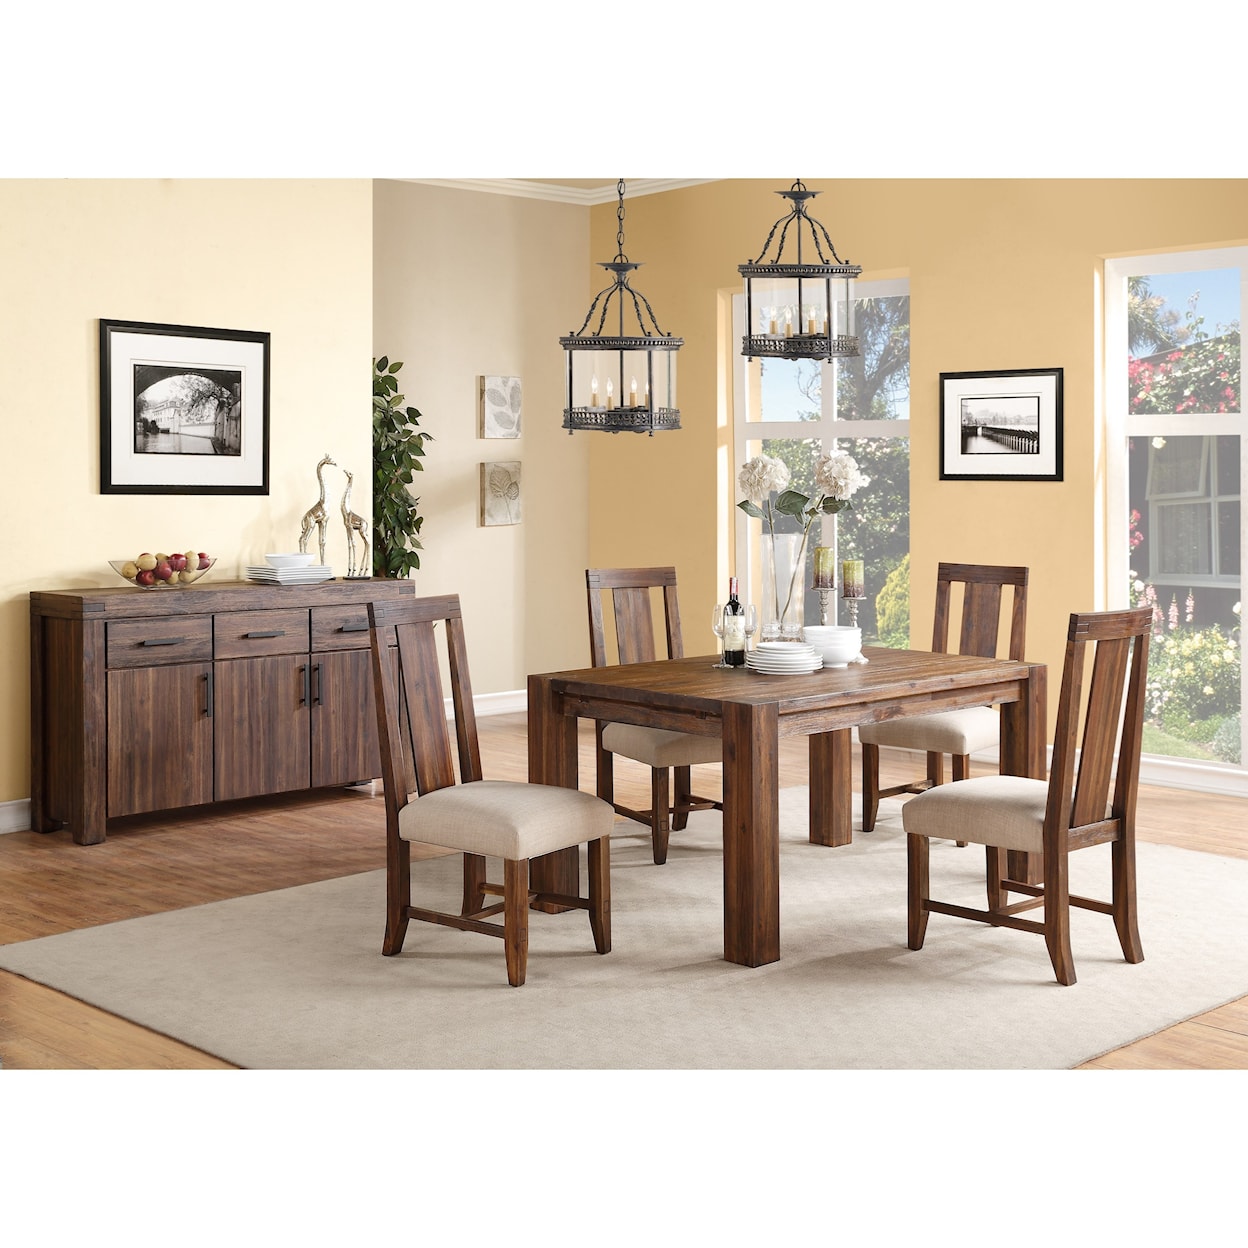 Modus International Meadow Casual Dining Room Group